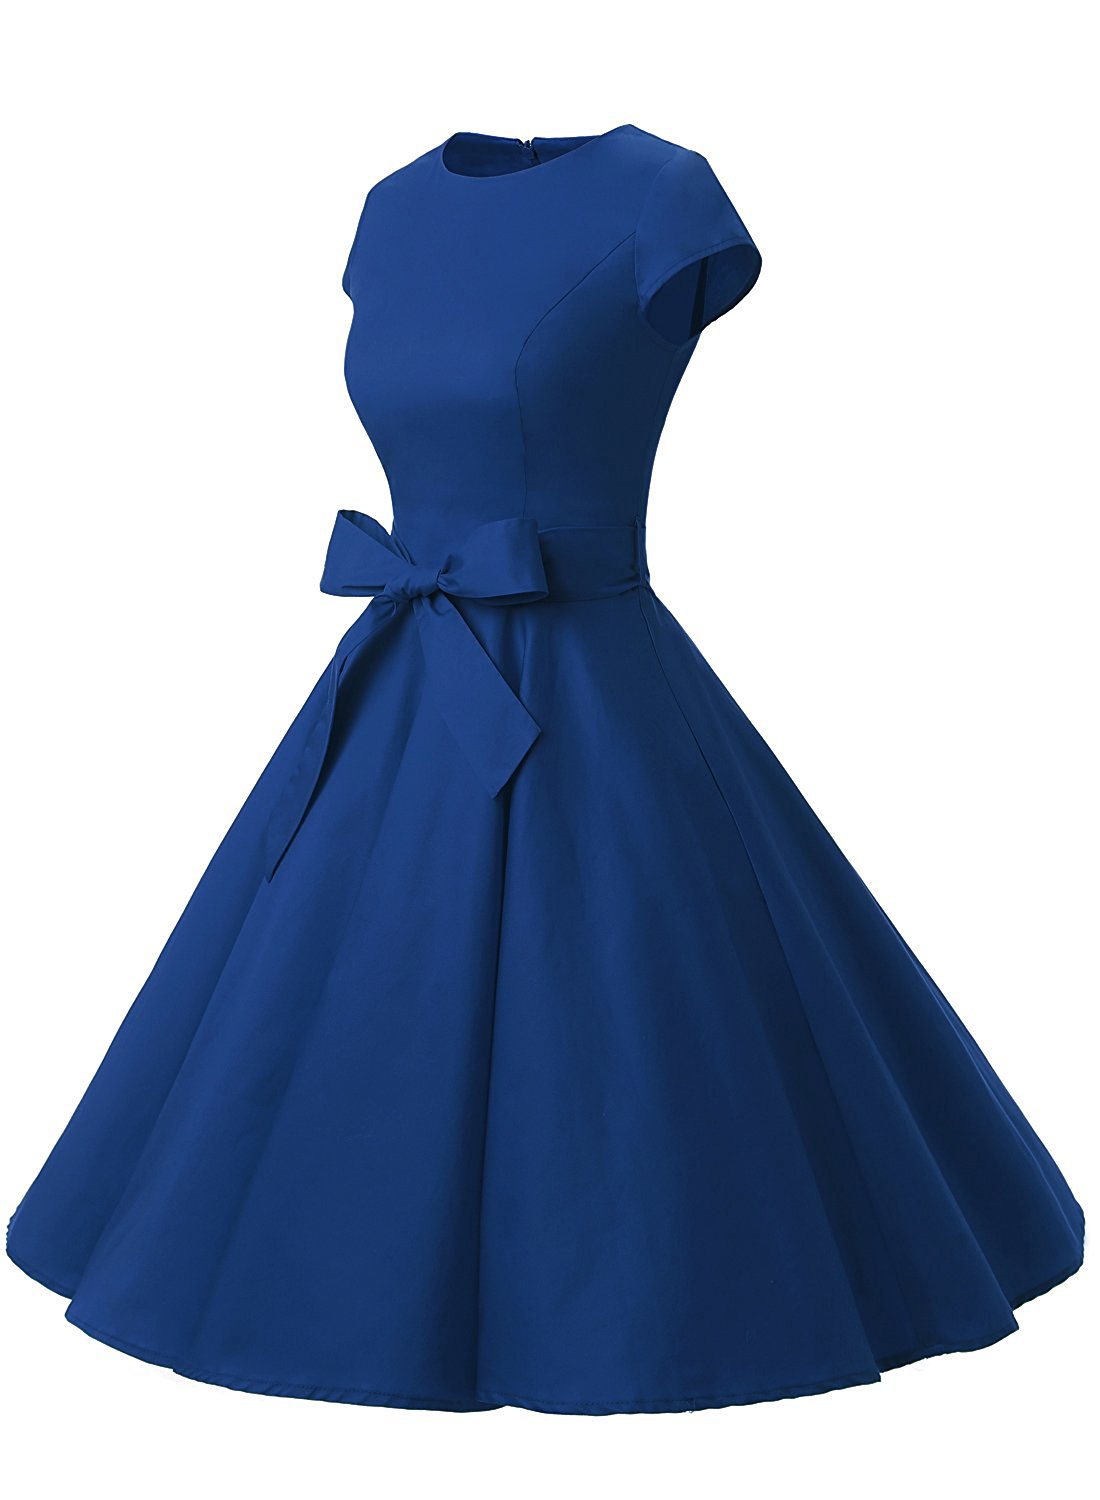 50s Fashion Retro Style Scoop Neck Blue Vintage Swing Dress With ...